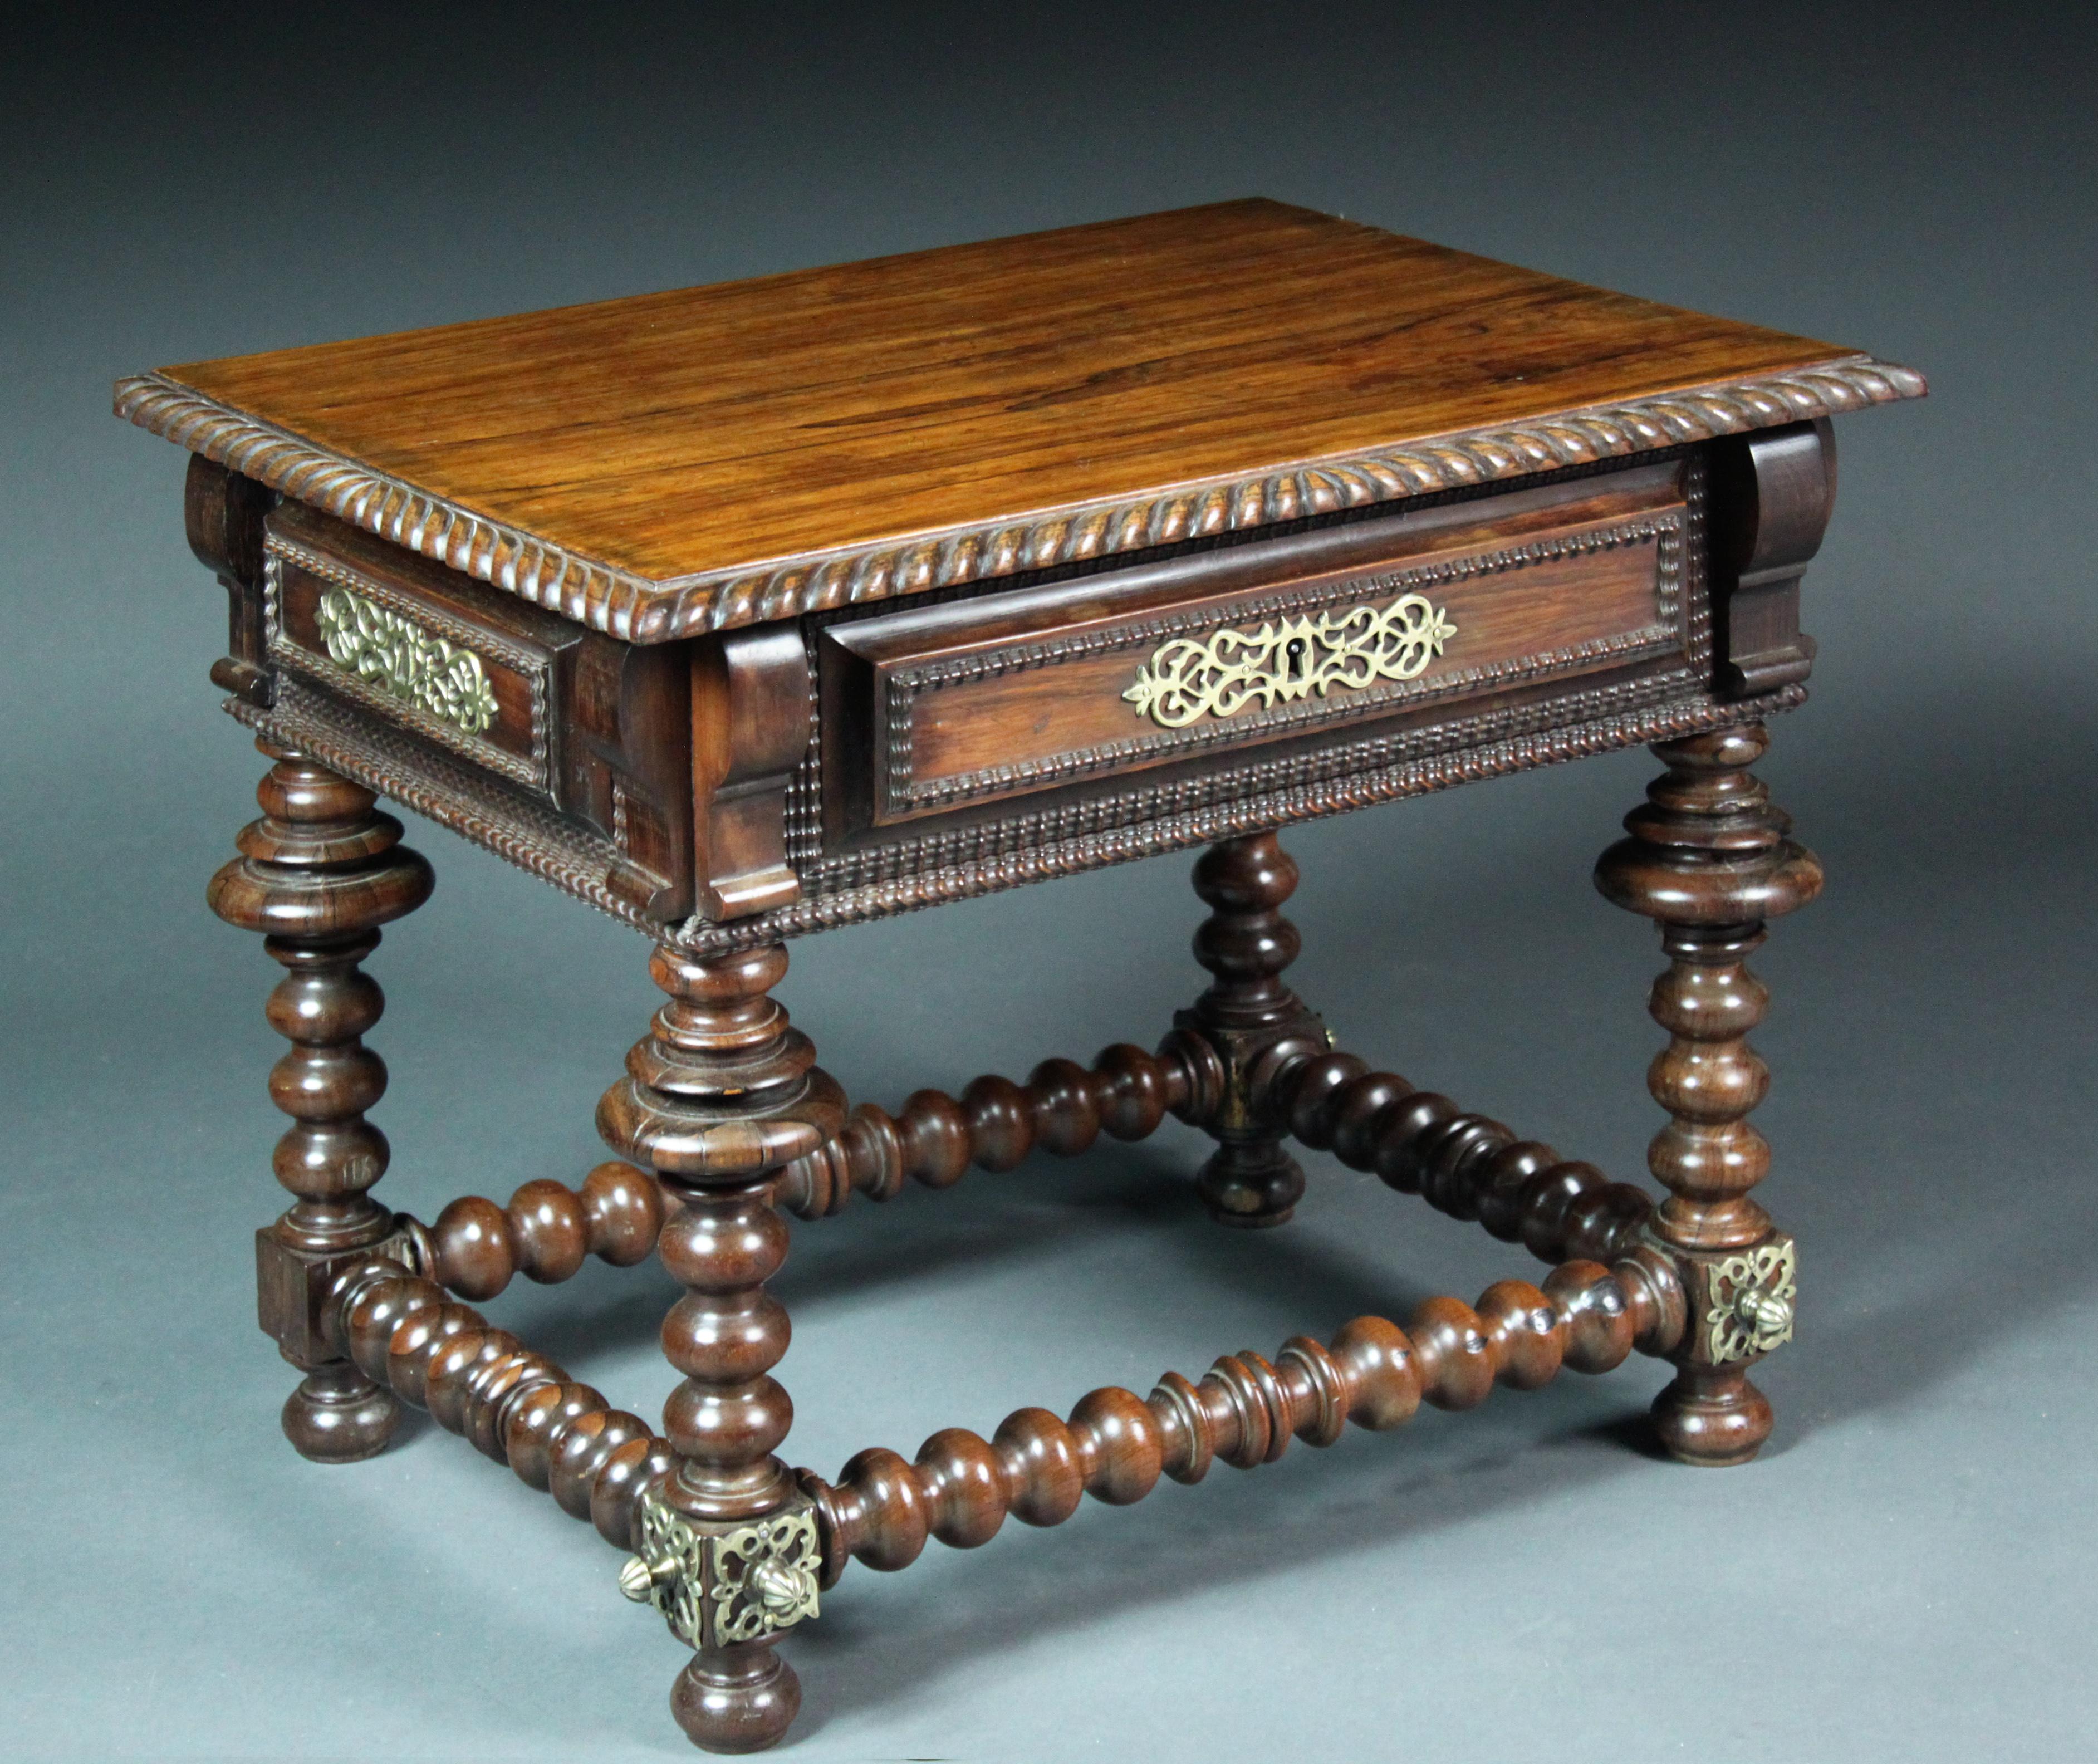 Two attractive Portuguese brass-mounted rosewood low tables: similar tables are advertised widely by auctioneers and dealers with dates varying from the late 17th-late 19th century. My feeling is our tables were made in the first half of the 19th